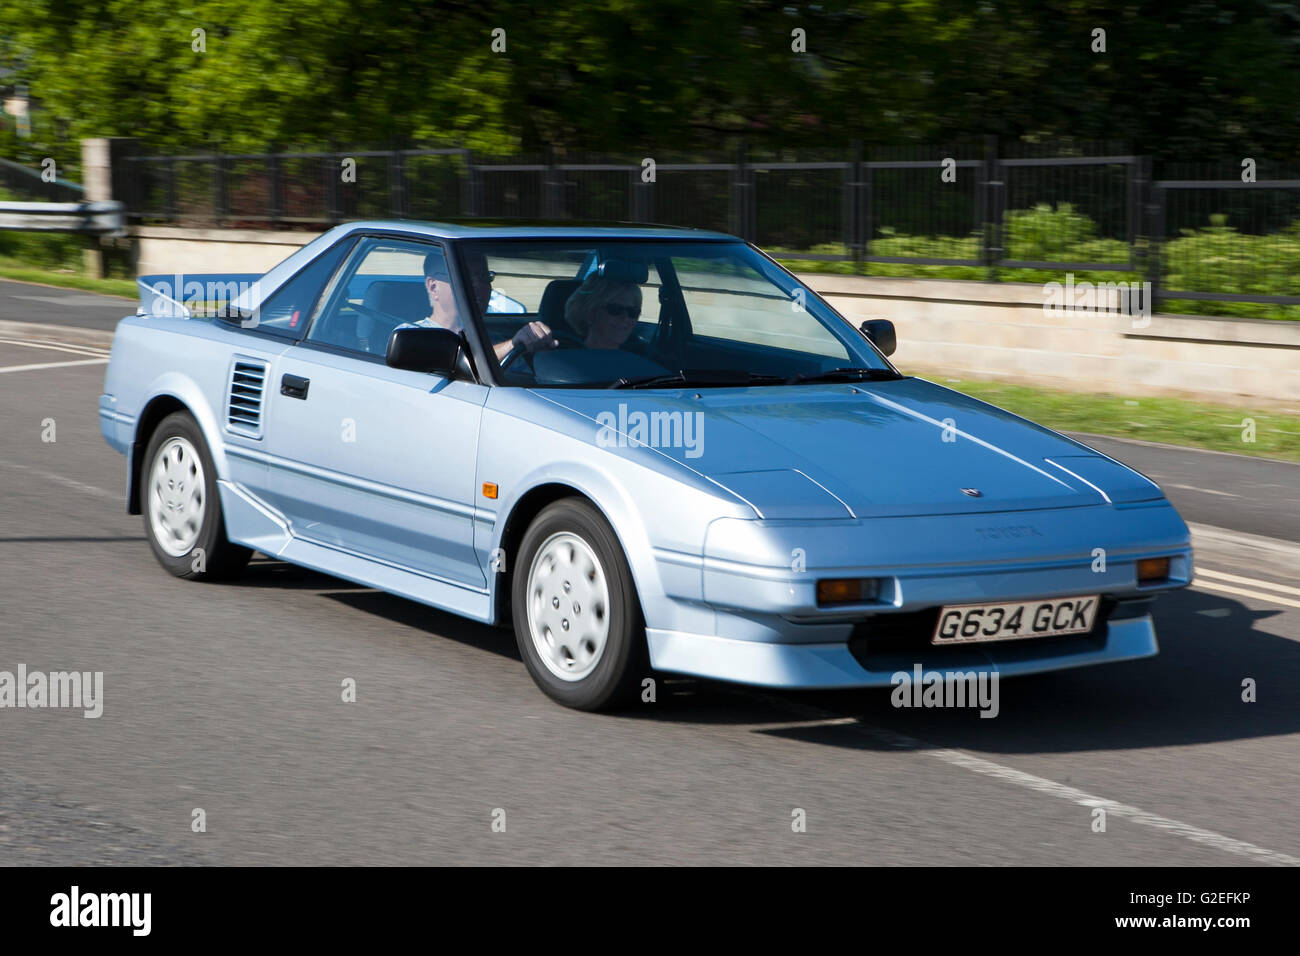 Toyota MR2 rear-wheel-drive sports car in Pendle, Lancashire, UK. 29th May, 2016. The engines roared throughout the rolling Pennine hills today as supercars from classic to modern day arrived for the PowerFest Charity meet in Pendle. Credit:  Cernan Elias/Alamy Live News Stock Photo